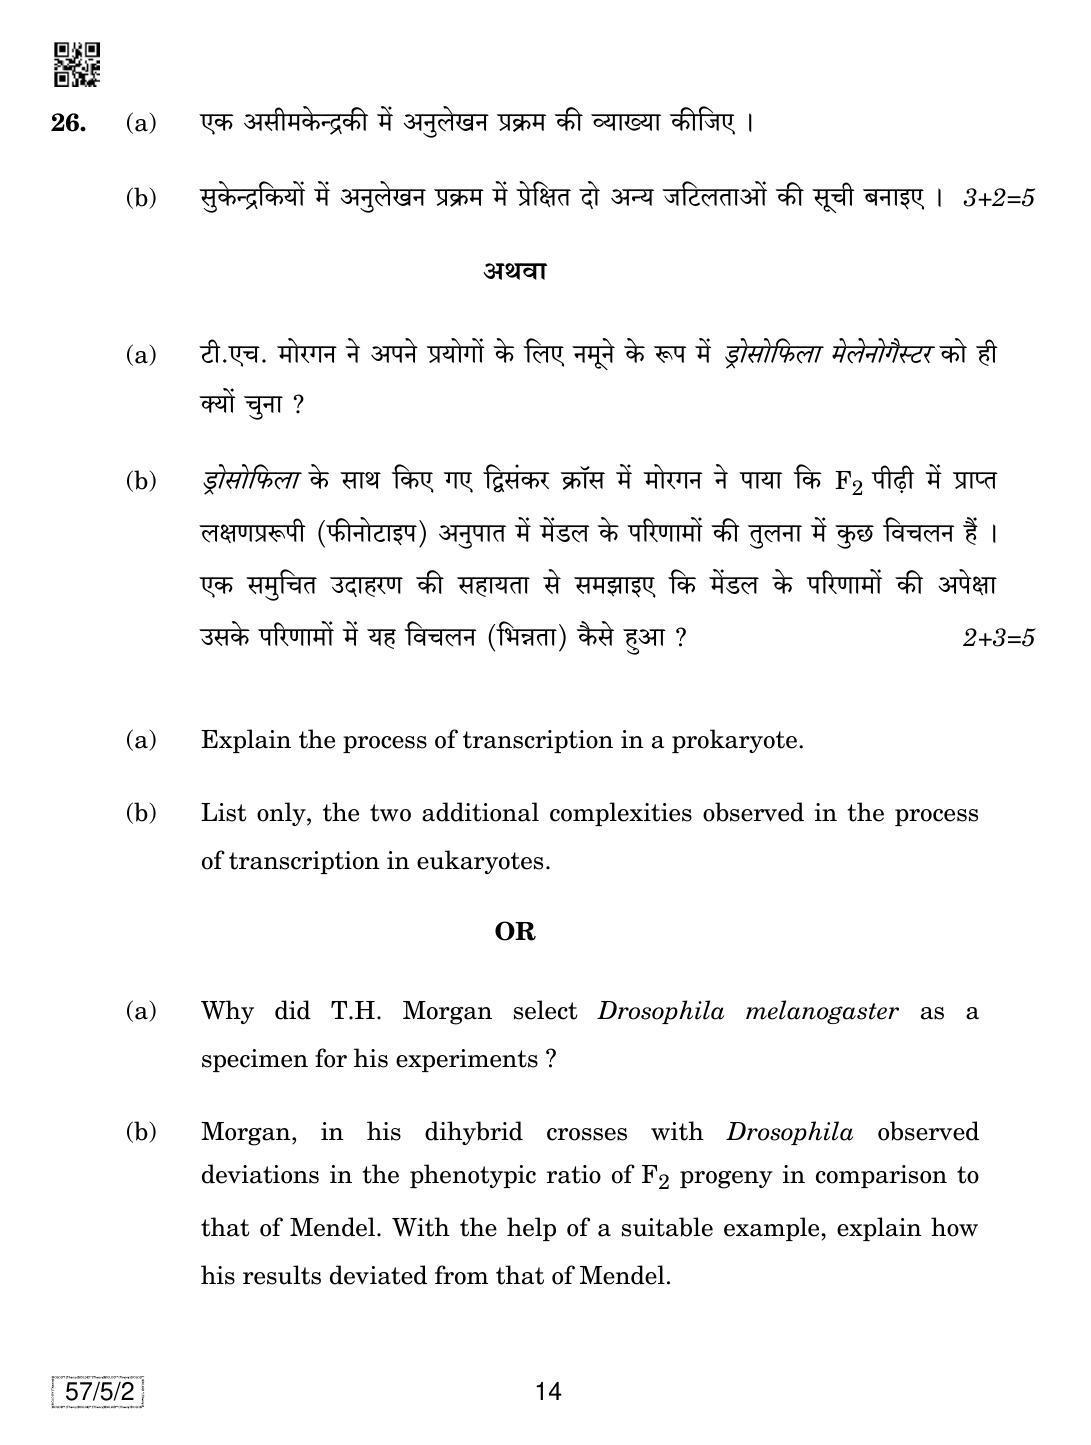 CBSE Class 12 57-5-2 Biology 2019 Question Paper - Page 14